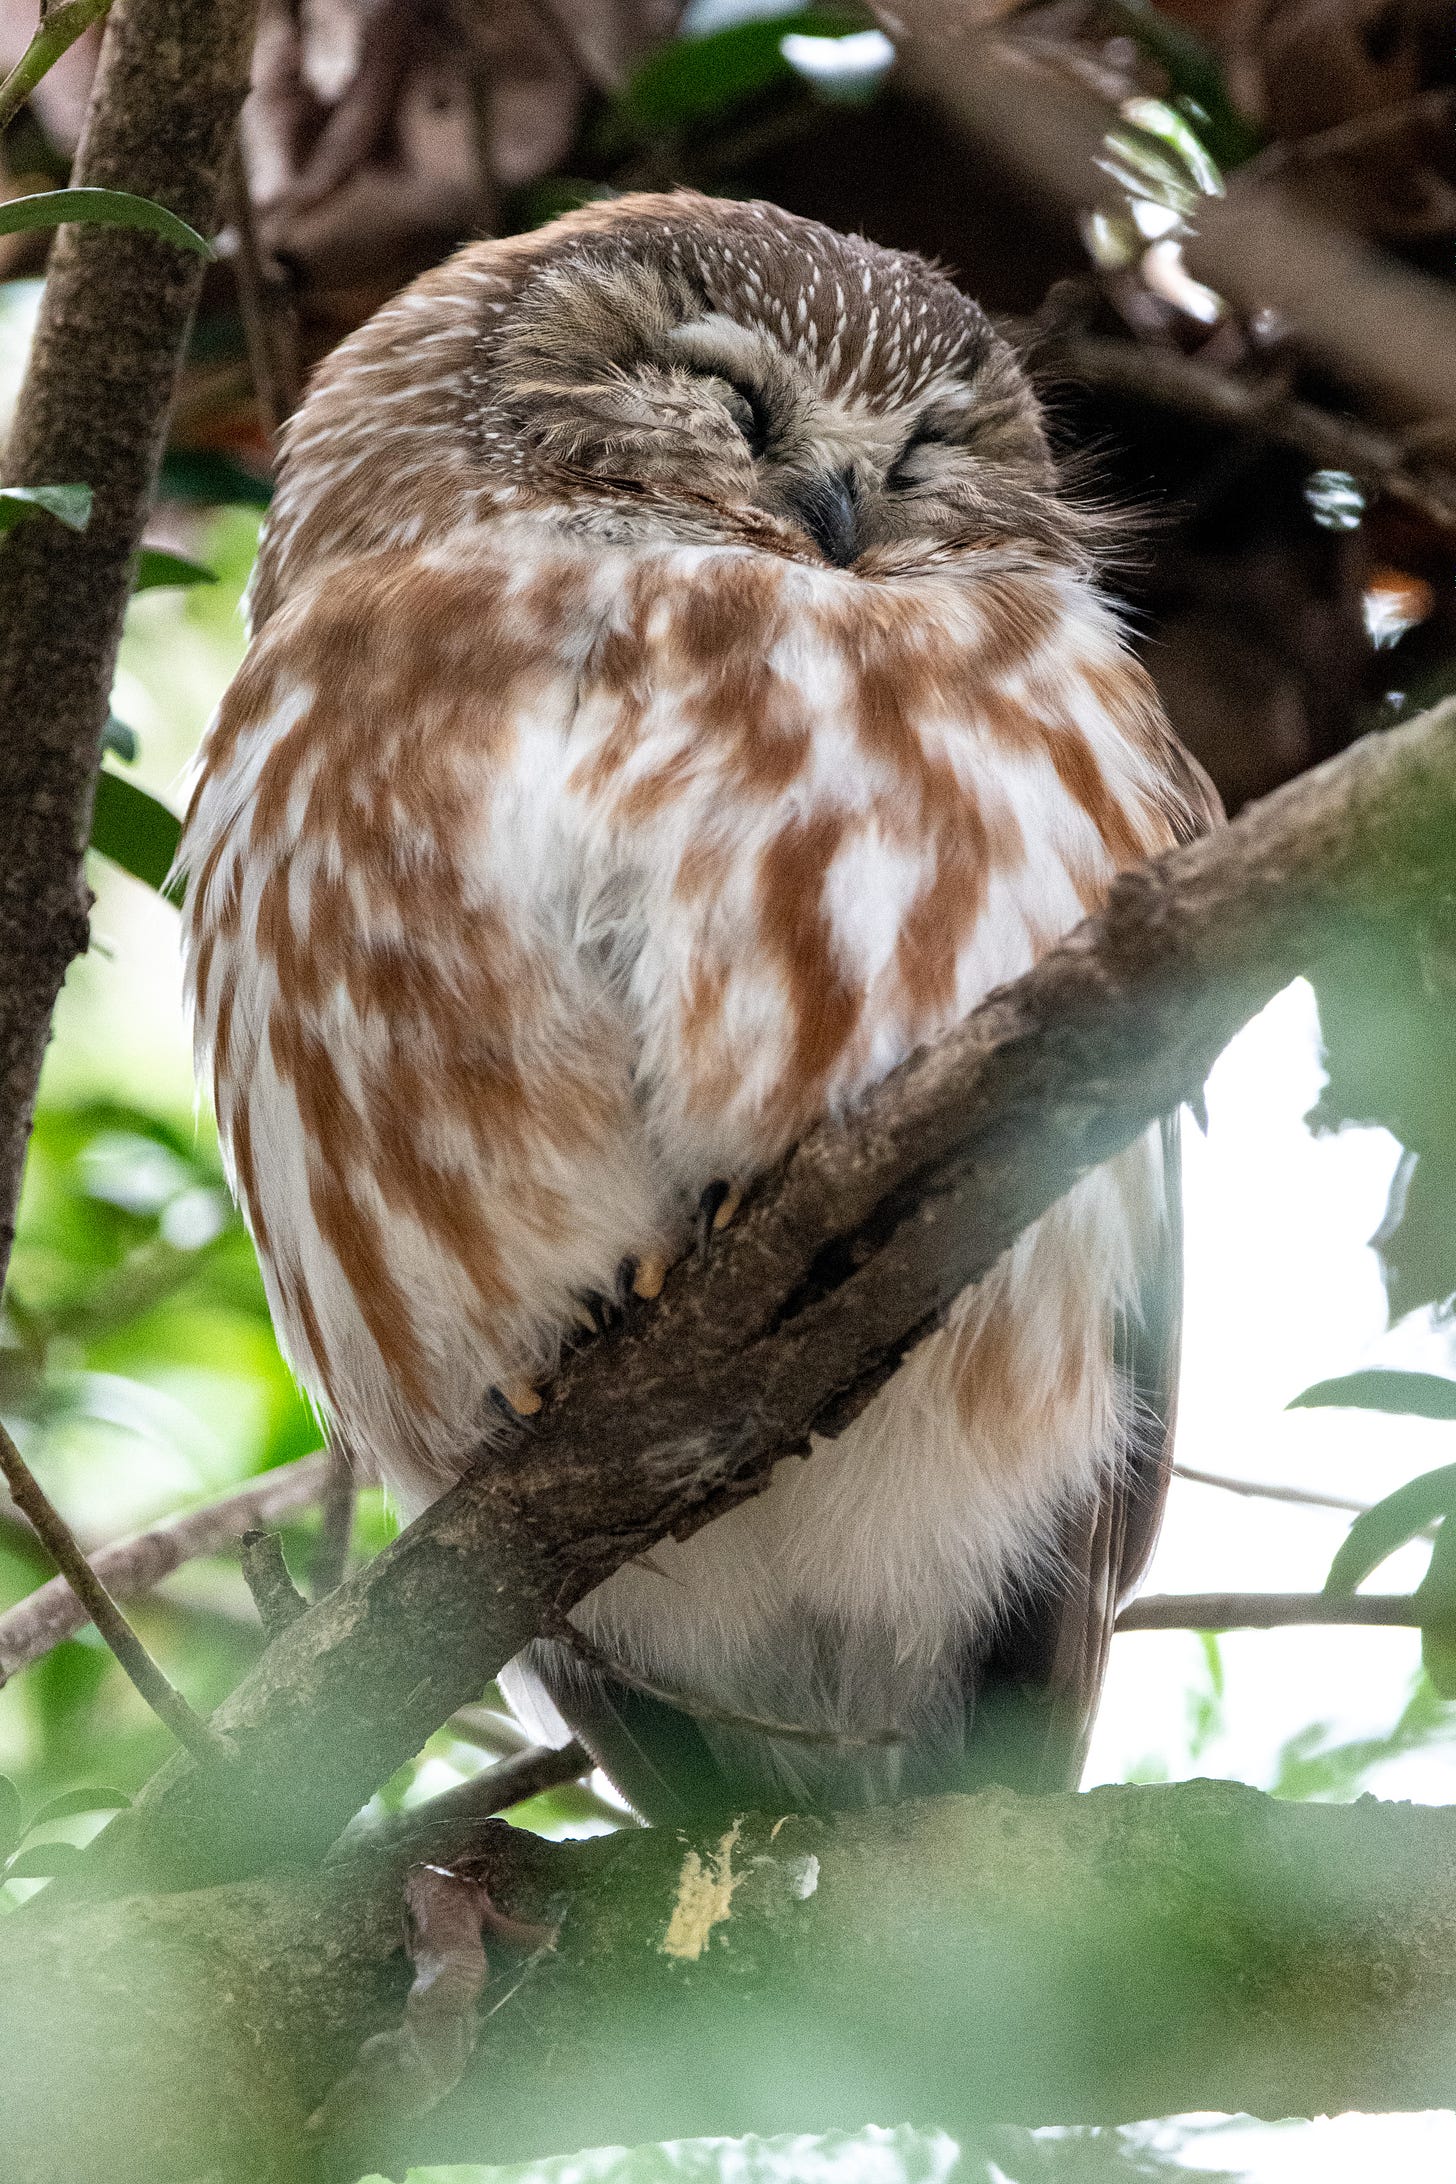 "A perched, sleeping Northern saw-whet owl, its eyes closed in crescents